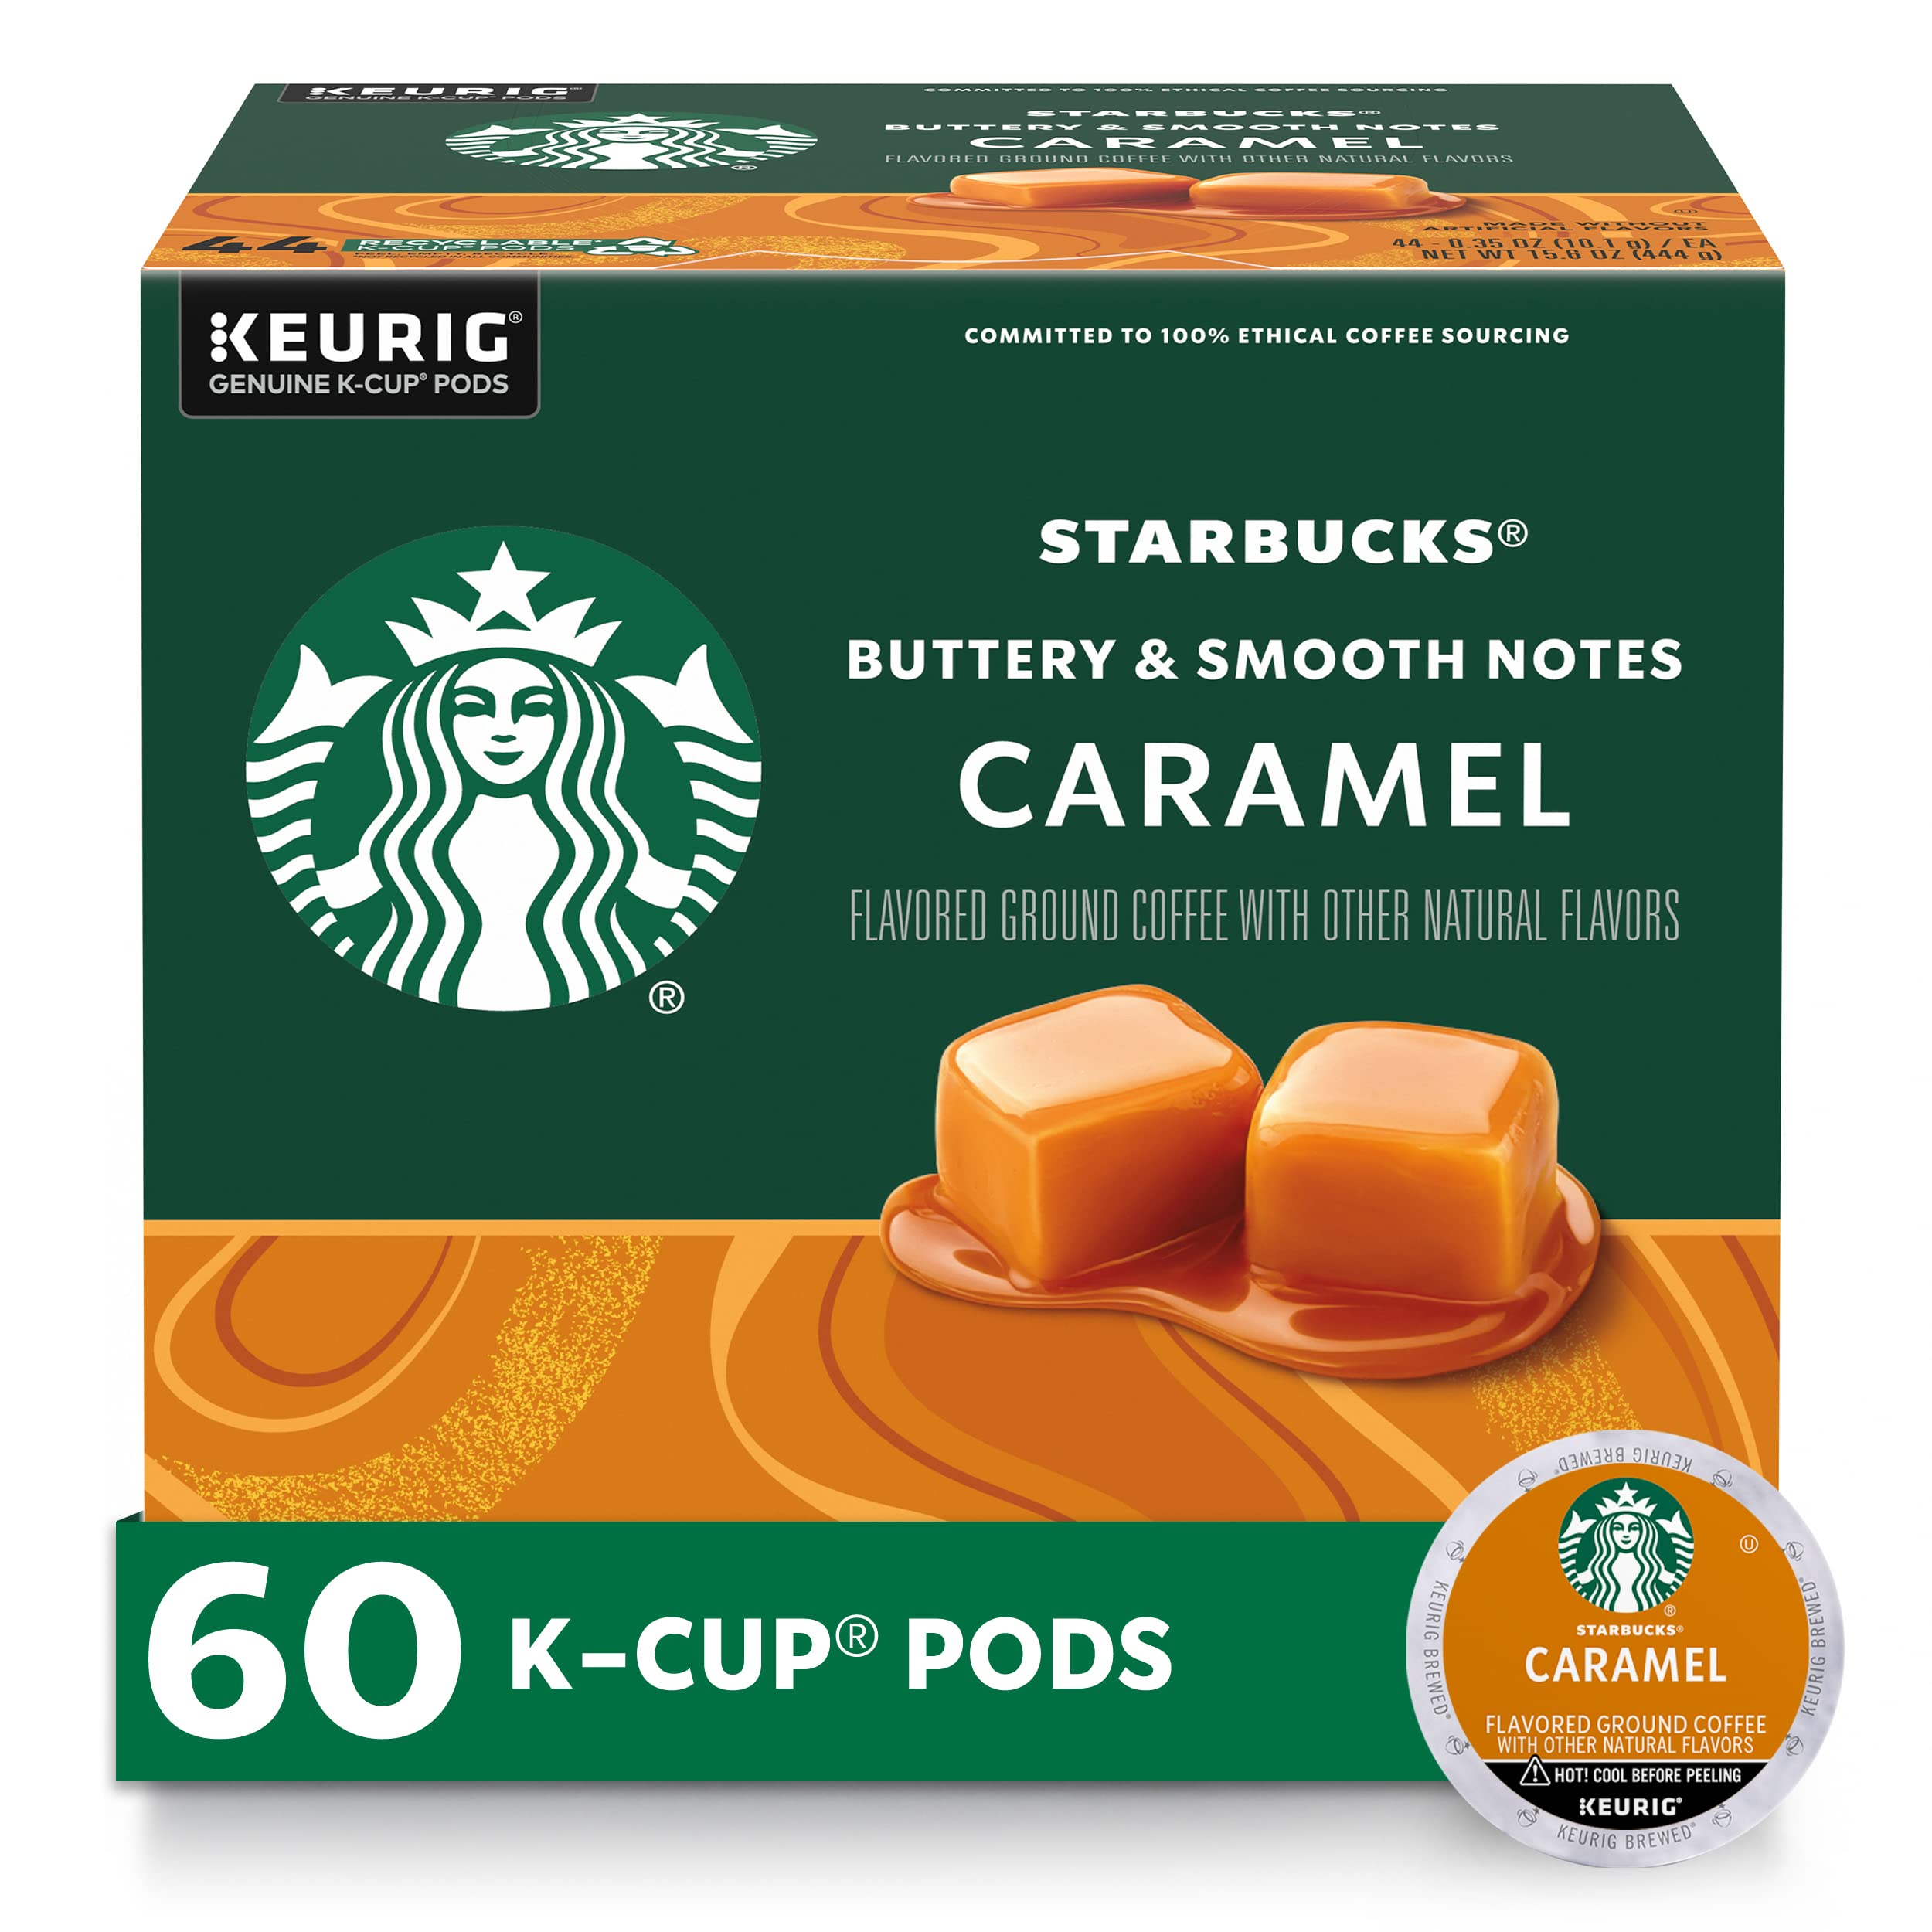 Starbucks Medium Roast K-Cup Coffee Pods — Caramel for Keurig Brewers — 6 boxes (60 pods total)